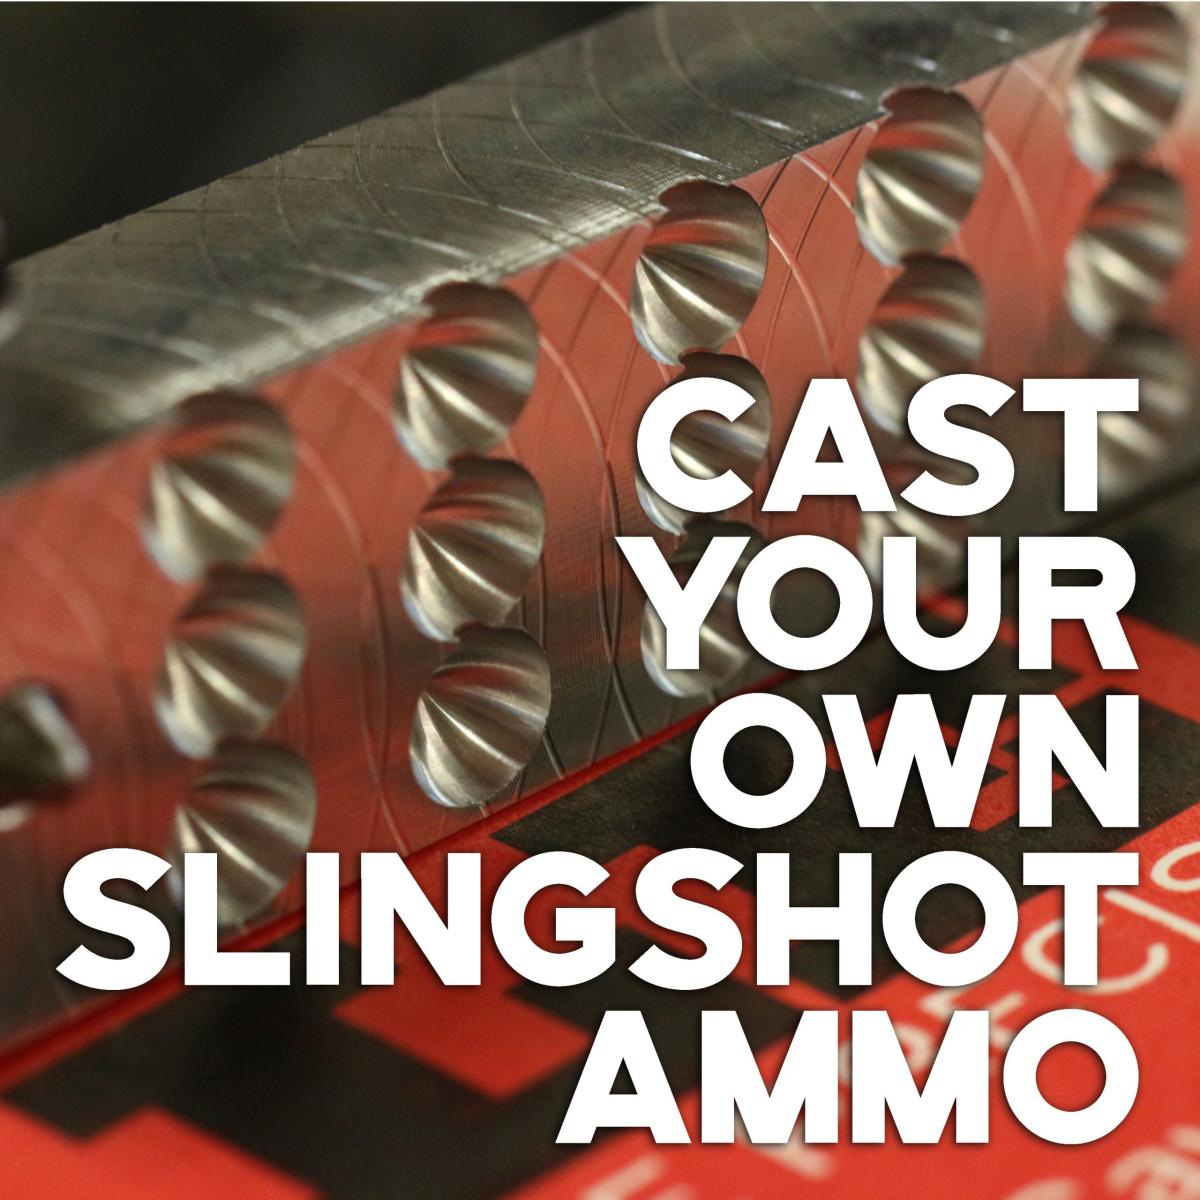 How To Cast Your Own Slingshot Ammo